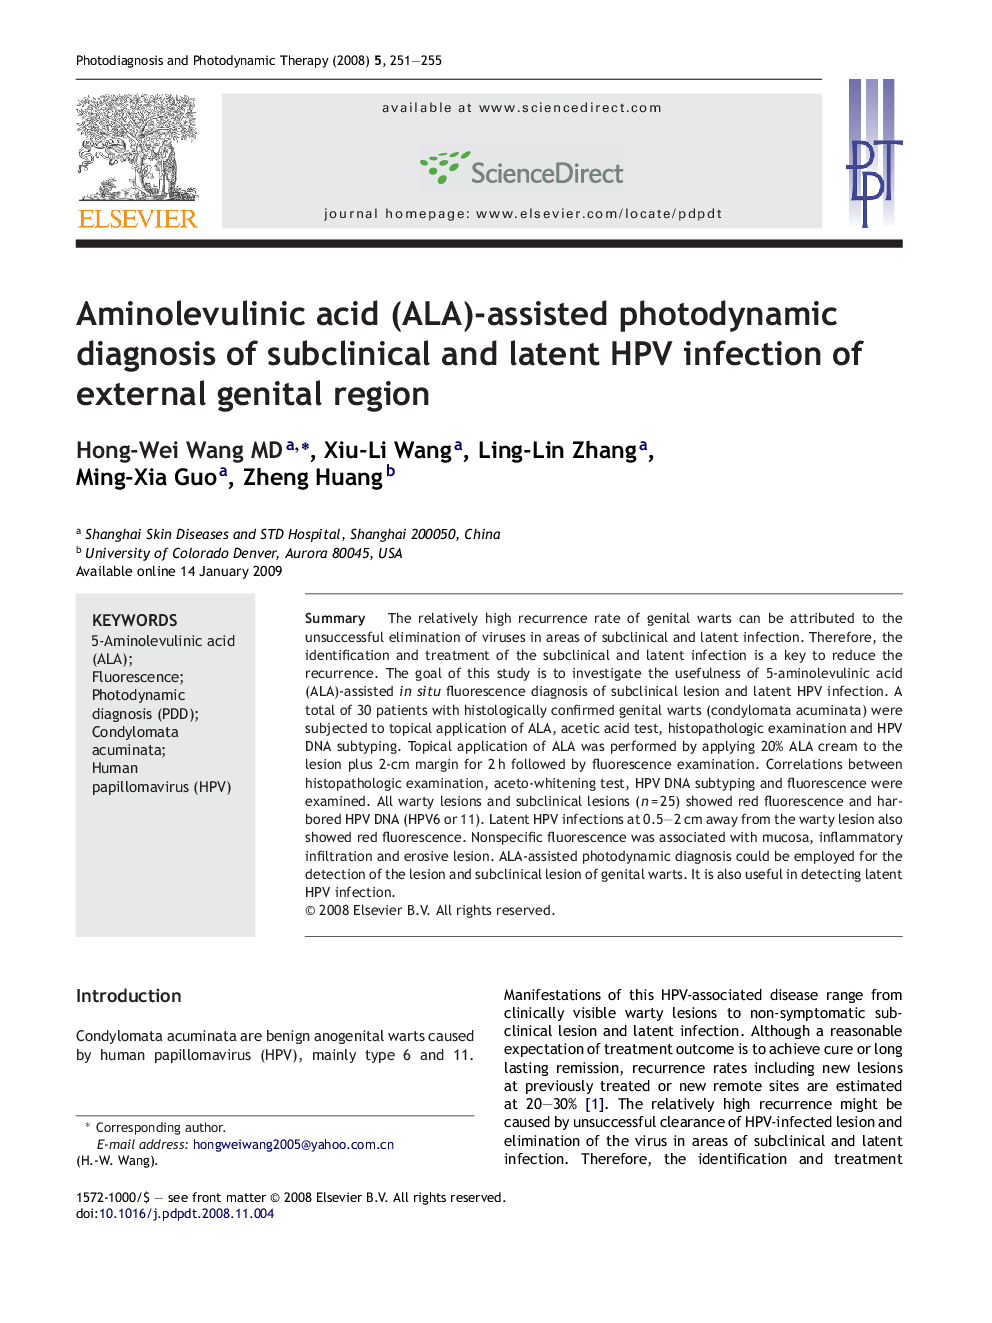 Aminolevulinic acid (ALA)-assisted photodynamic diagnosis of subclinical and latent HPV infection of external genital region